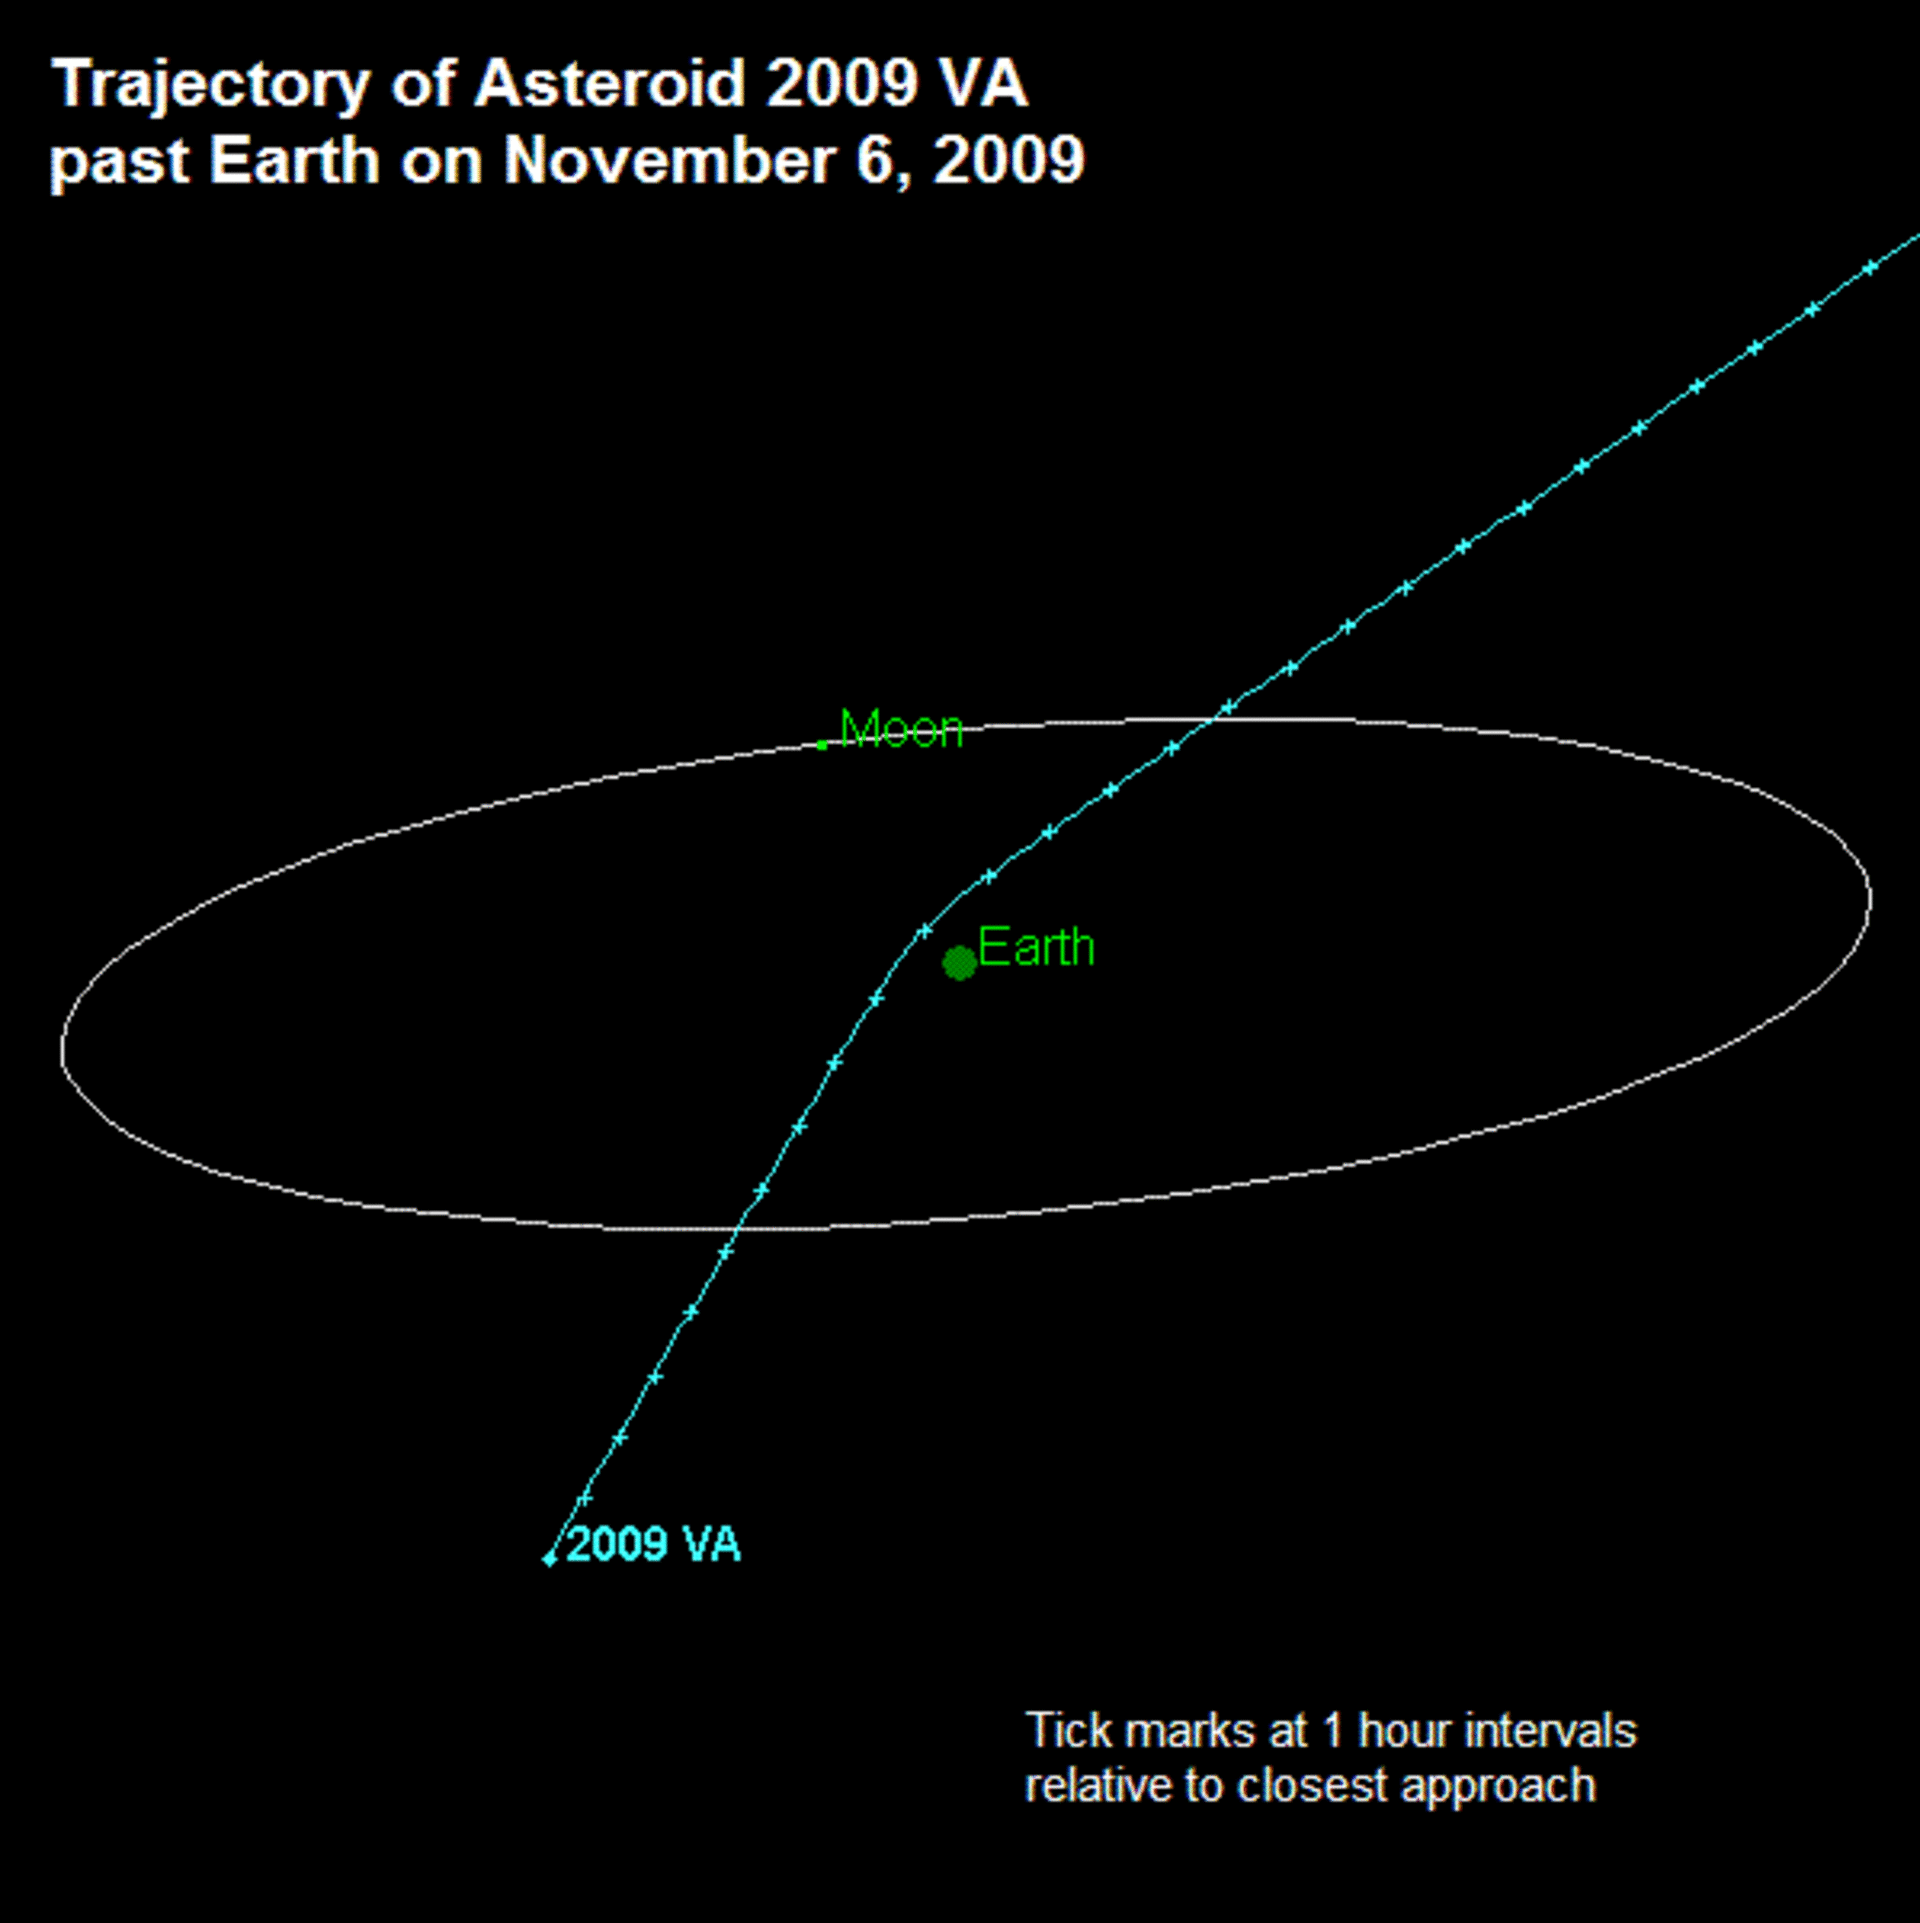 2006 VA passed about 14 000 km from Earth on 6 November 2009